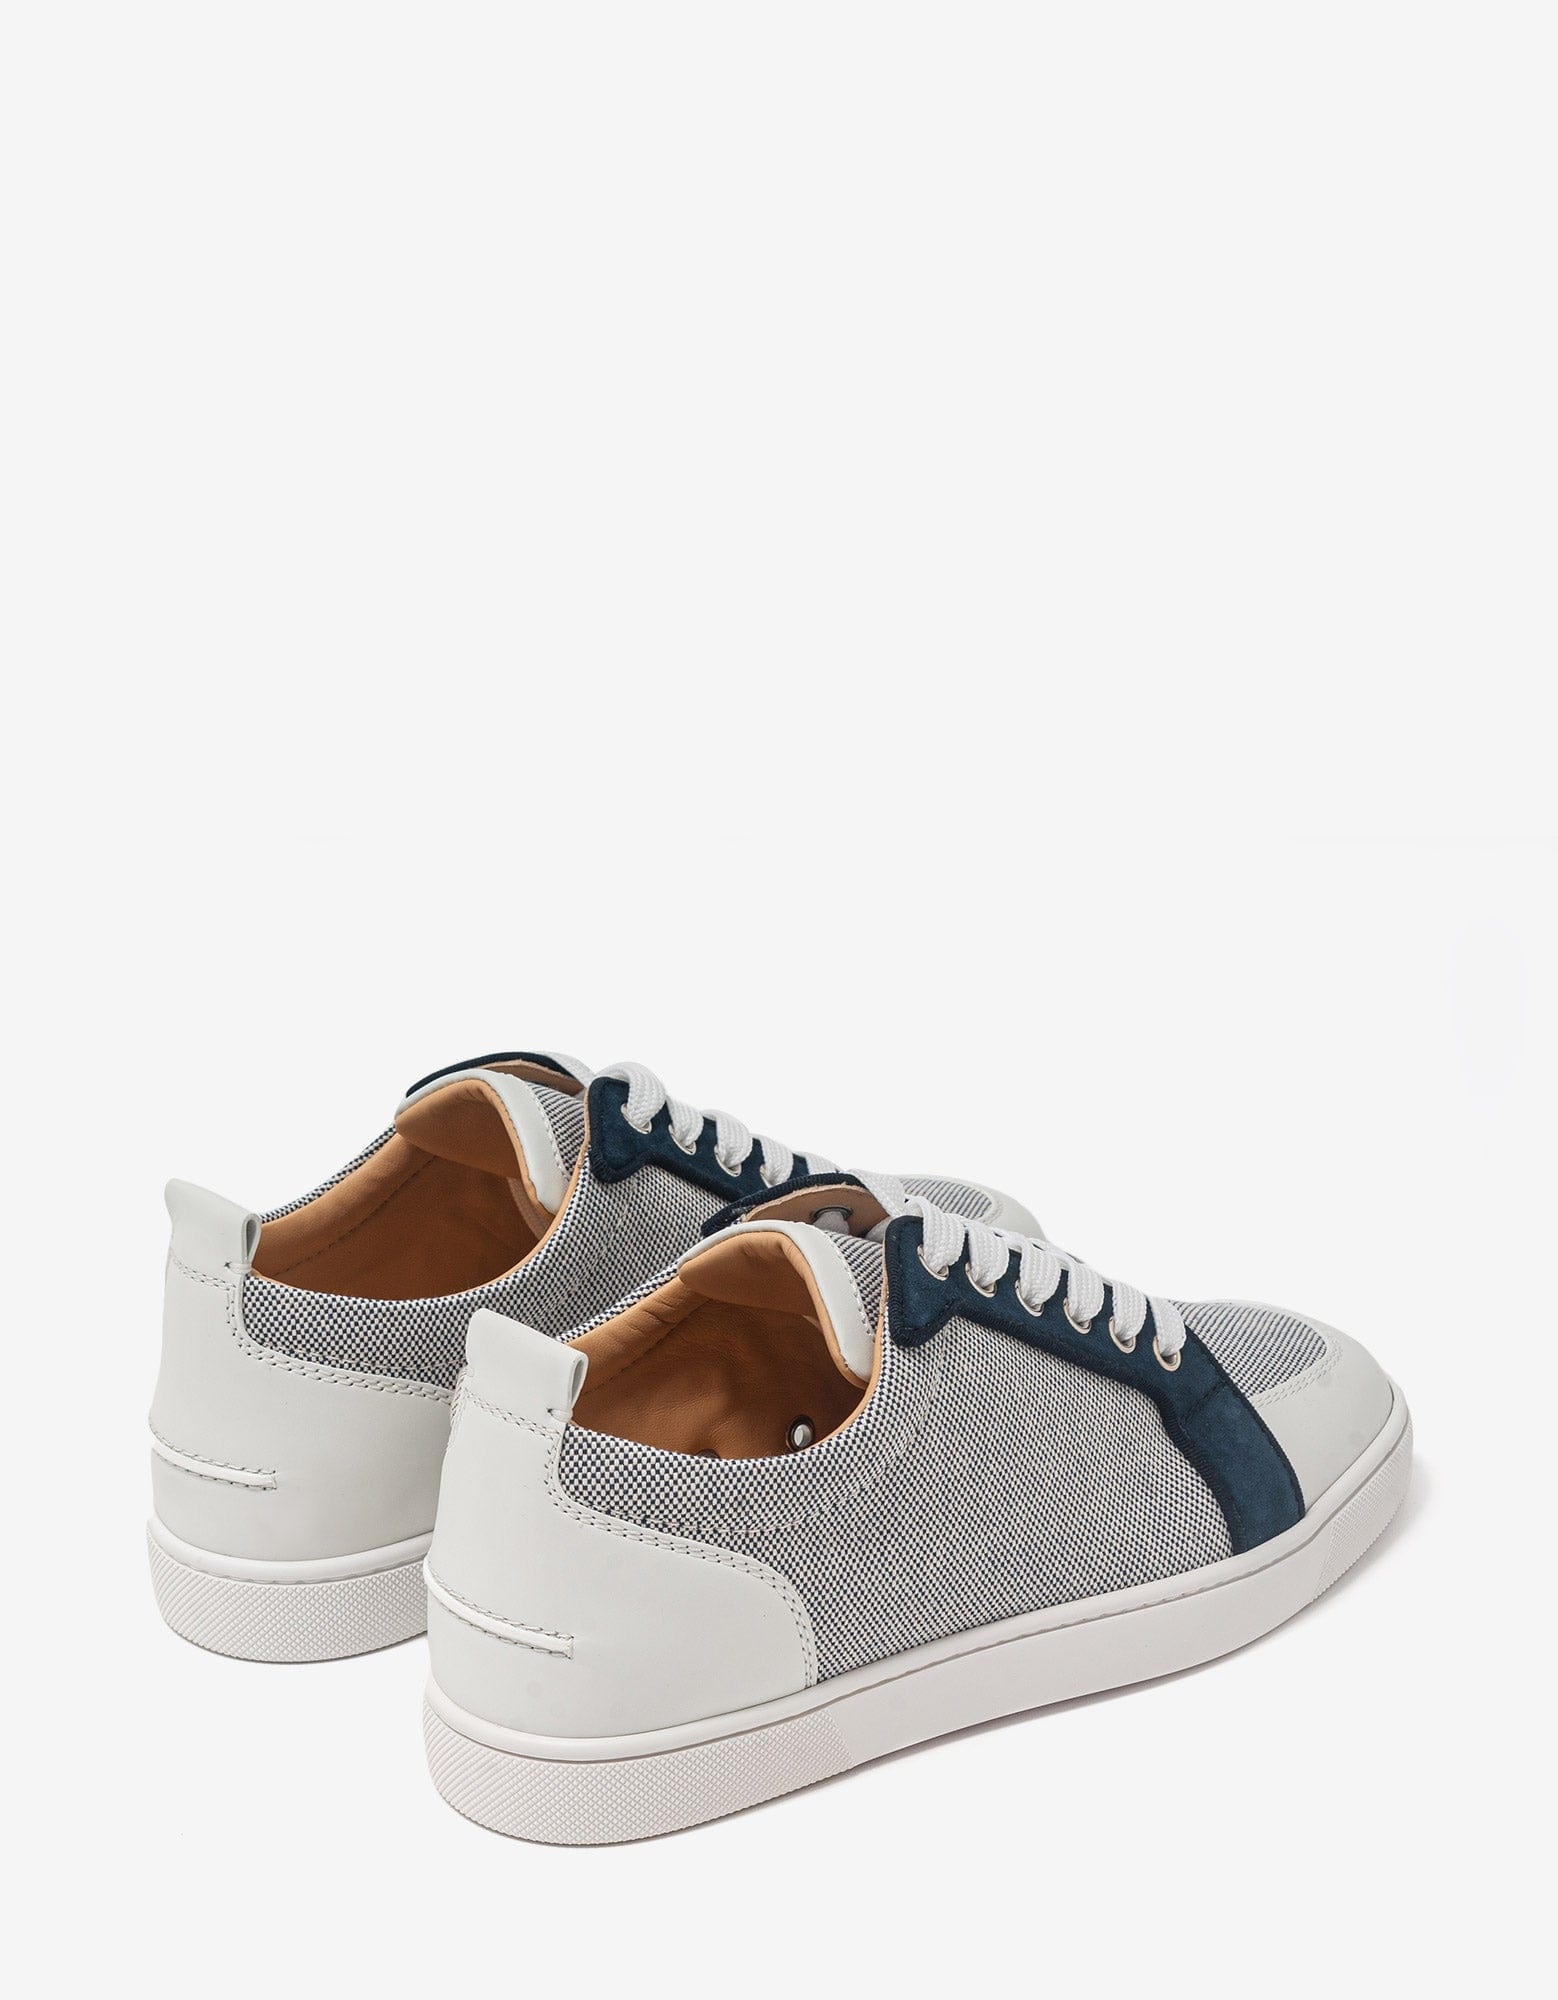 Rantulow Flat Navy Blue & White Trainers - - 6